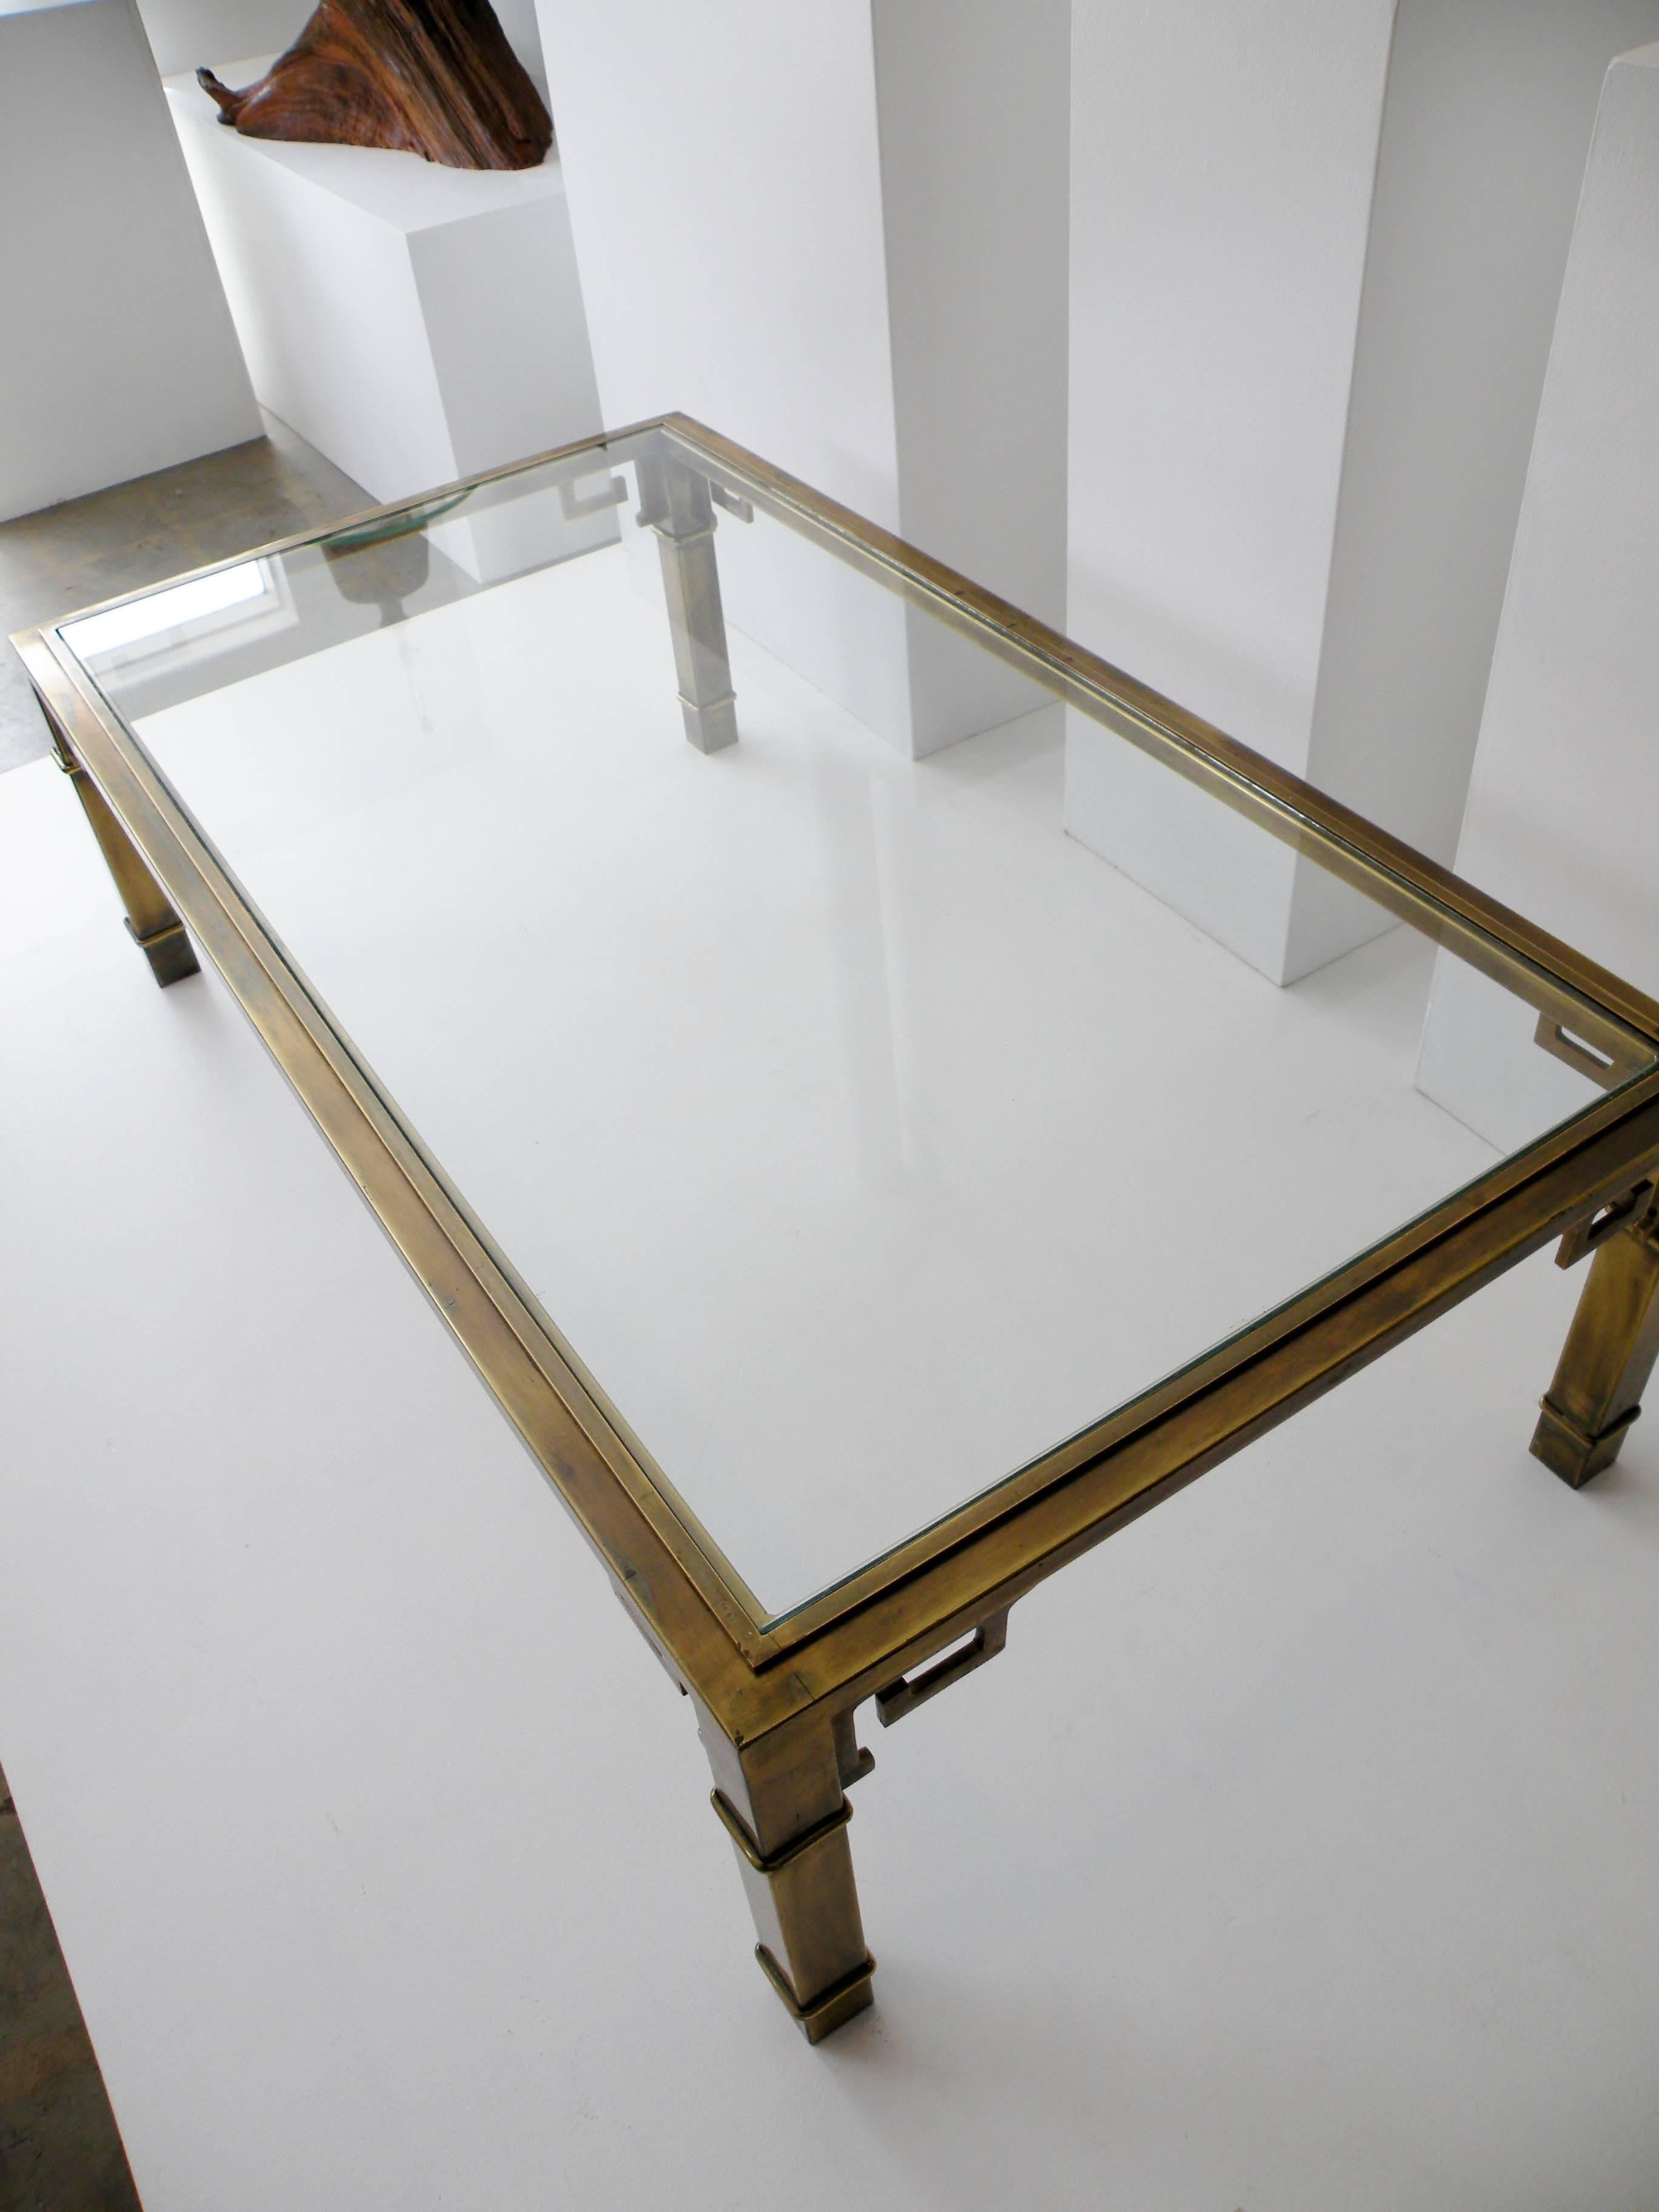 Iconic 1970s patinated brass rectangular coffee table with a Greek Key chinoiserie motif from the renowned luxury workshops of Mastercraft Furniture.